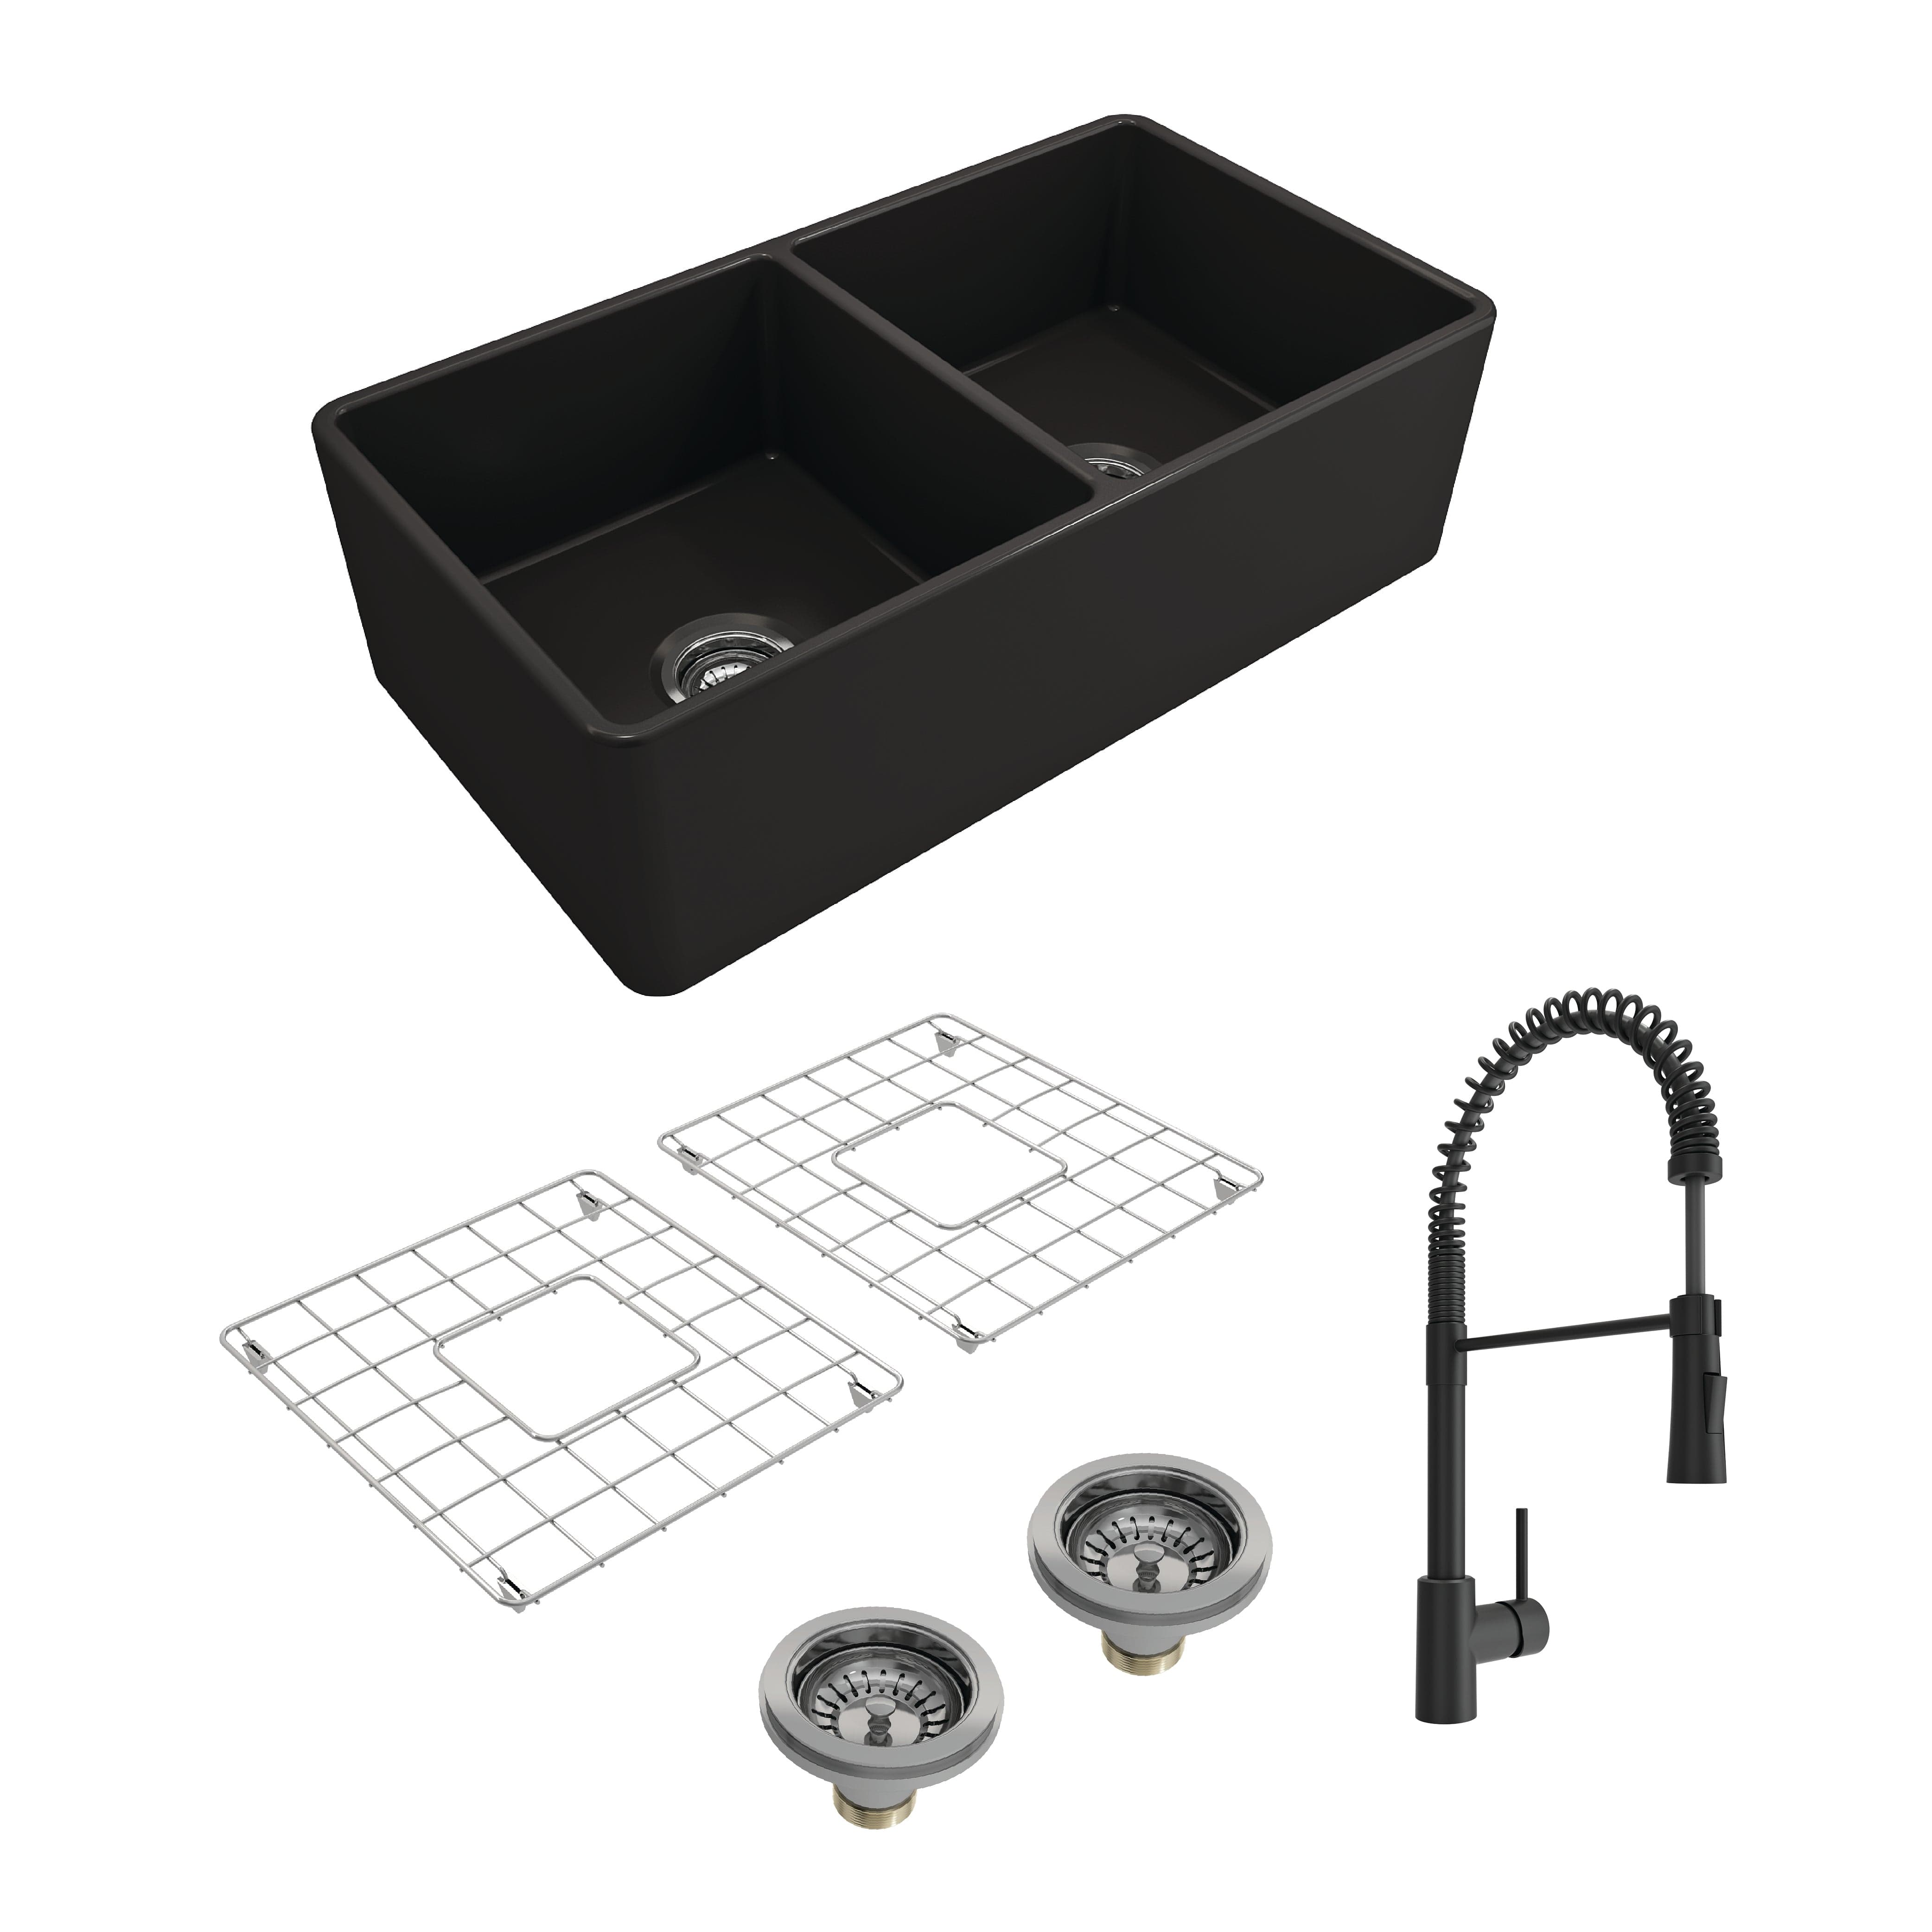 BOCCHI CLASSICO 33" Fireclay Kitchen Sink with Protective Bottom Grids and Strainers with Livenza 2.0 Faucet